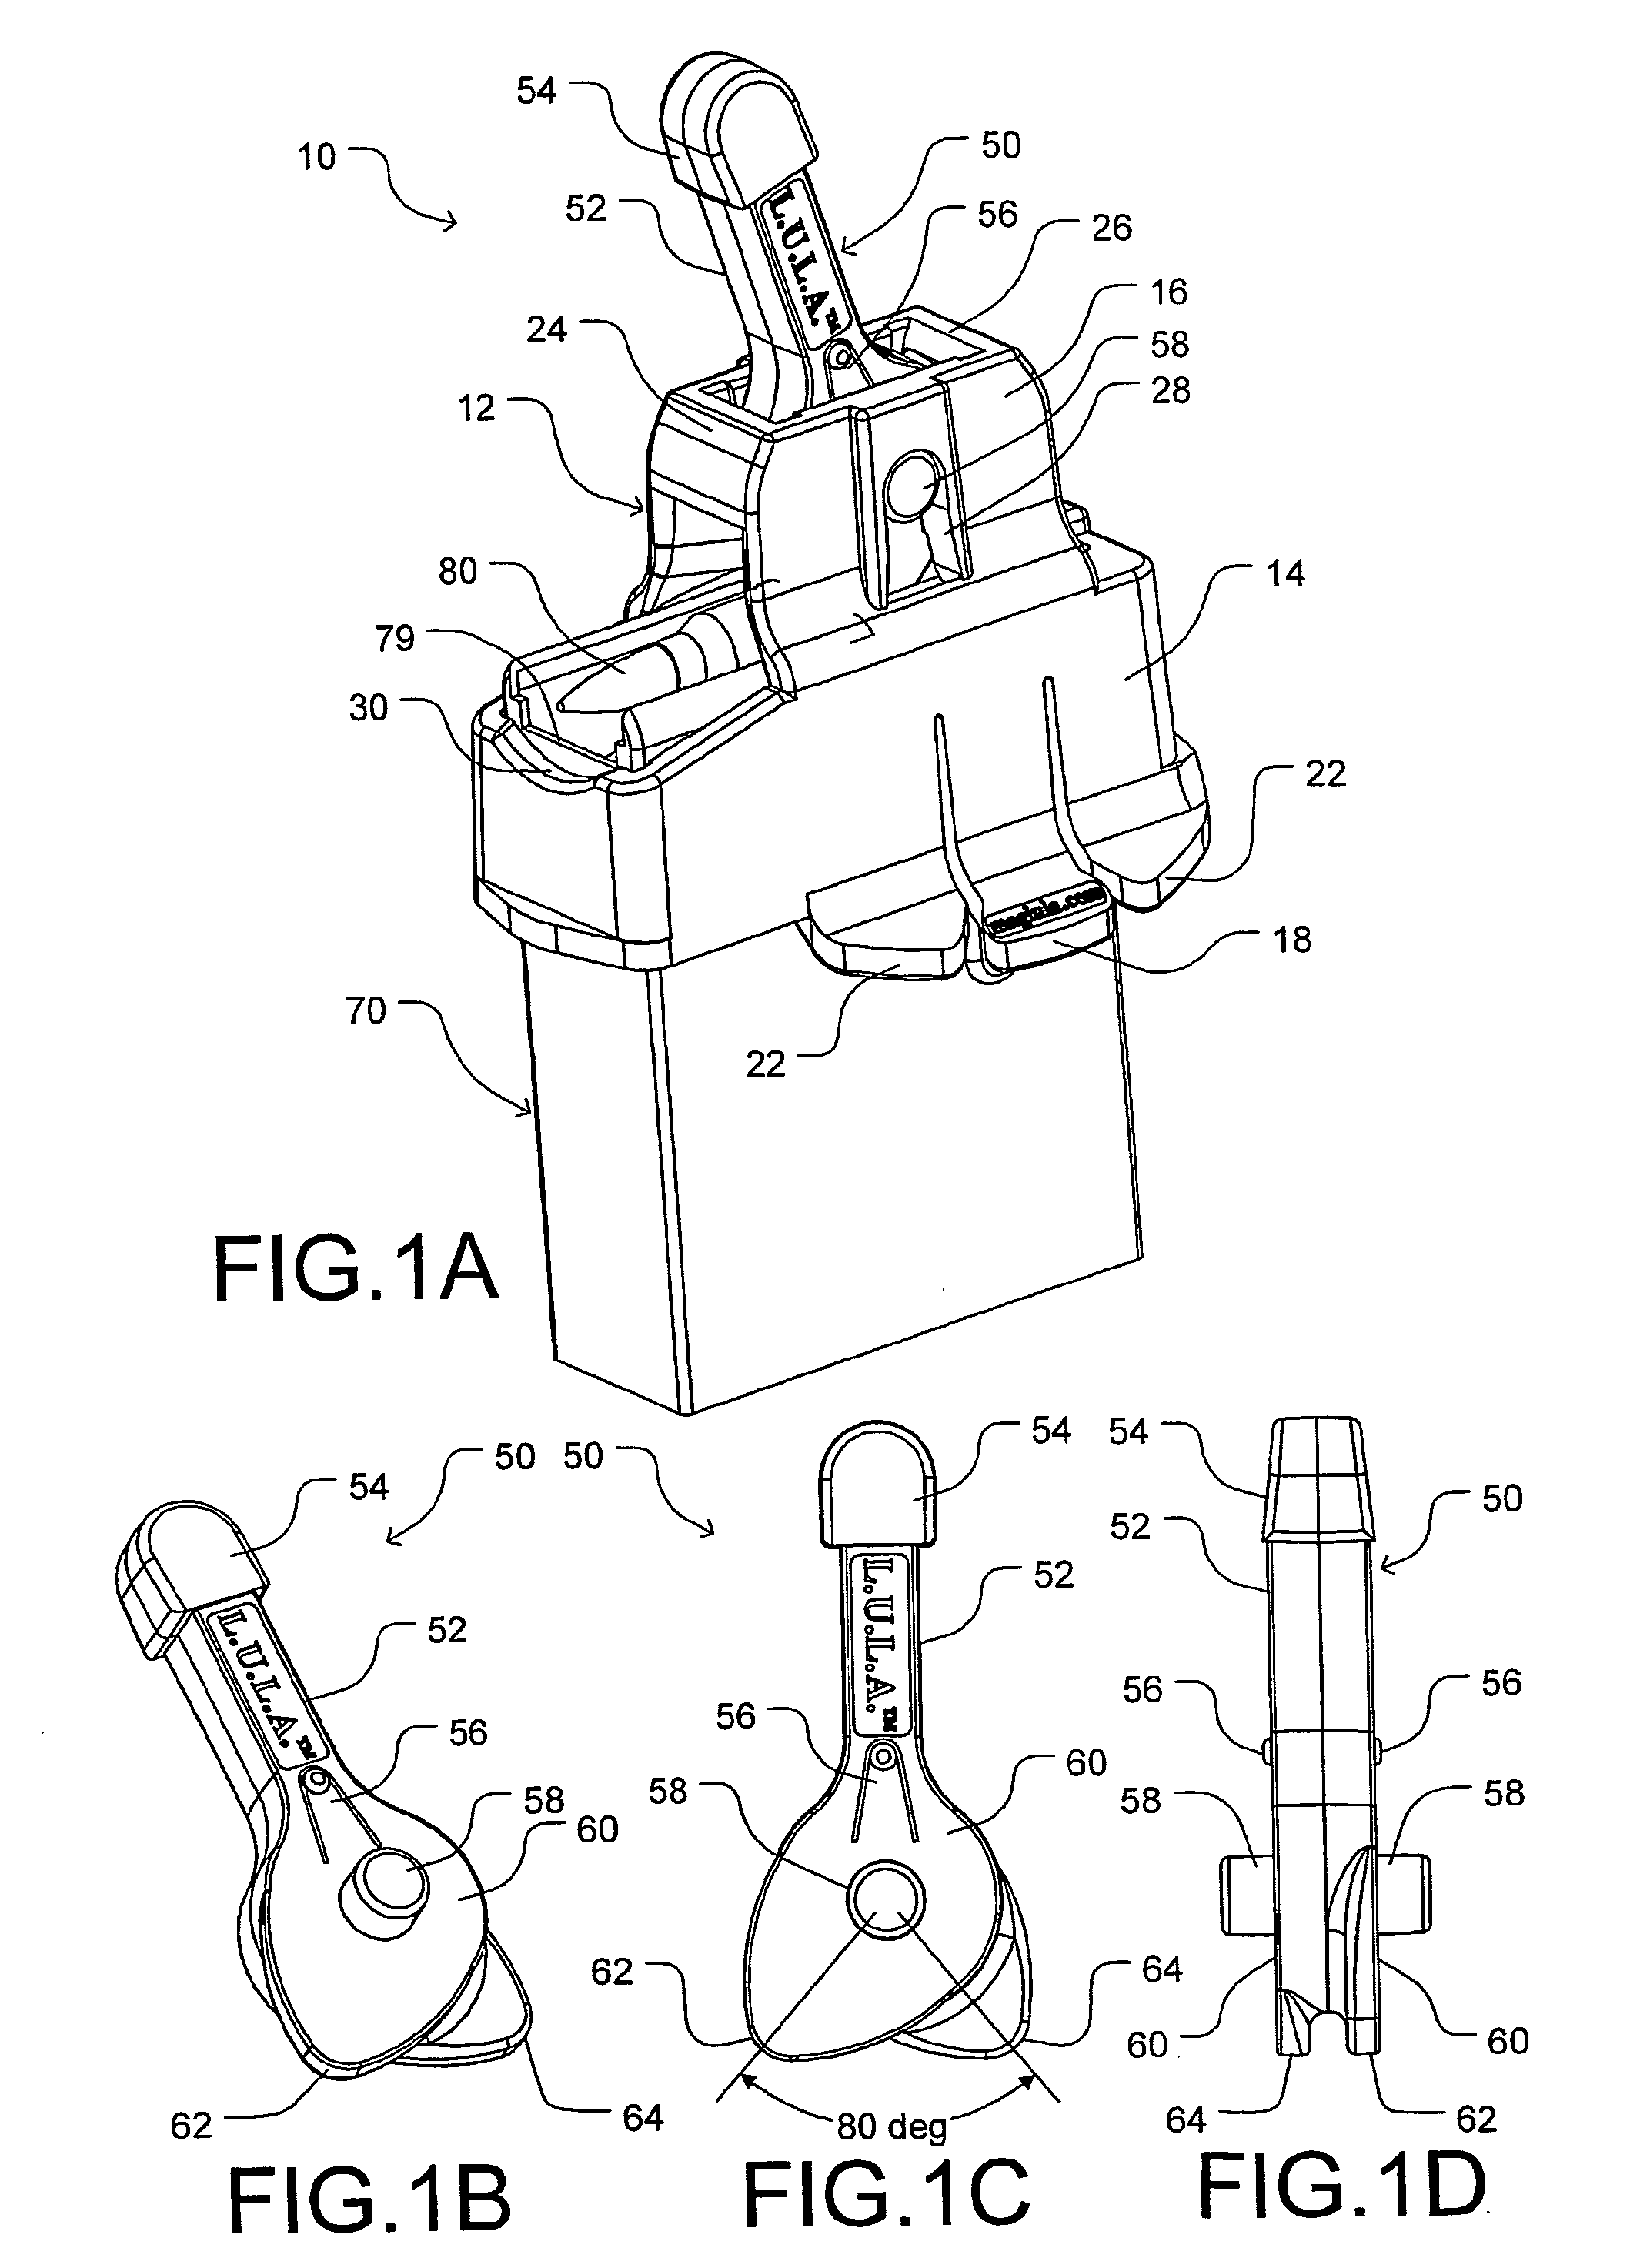 Magazine loader and unloader accessory